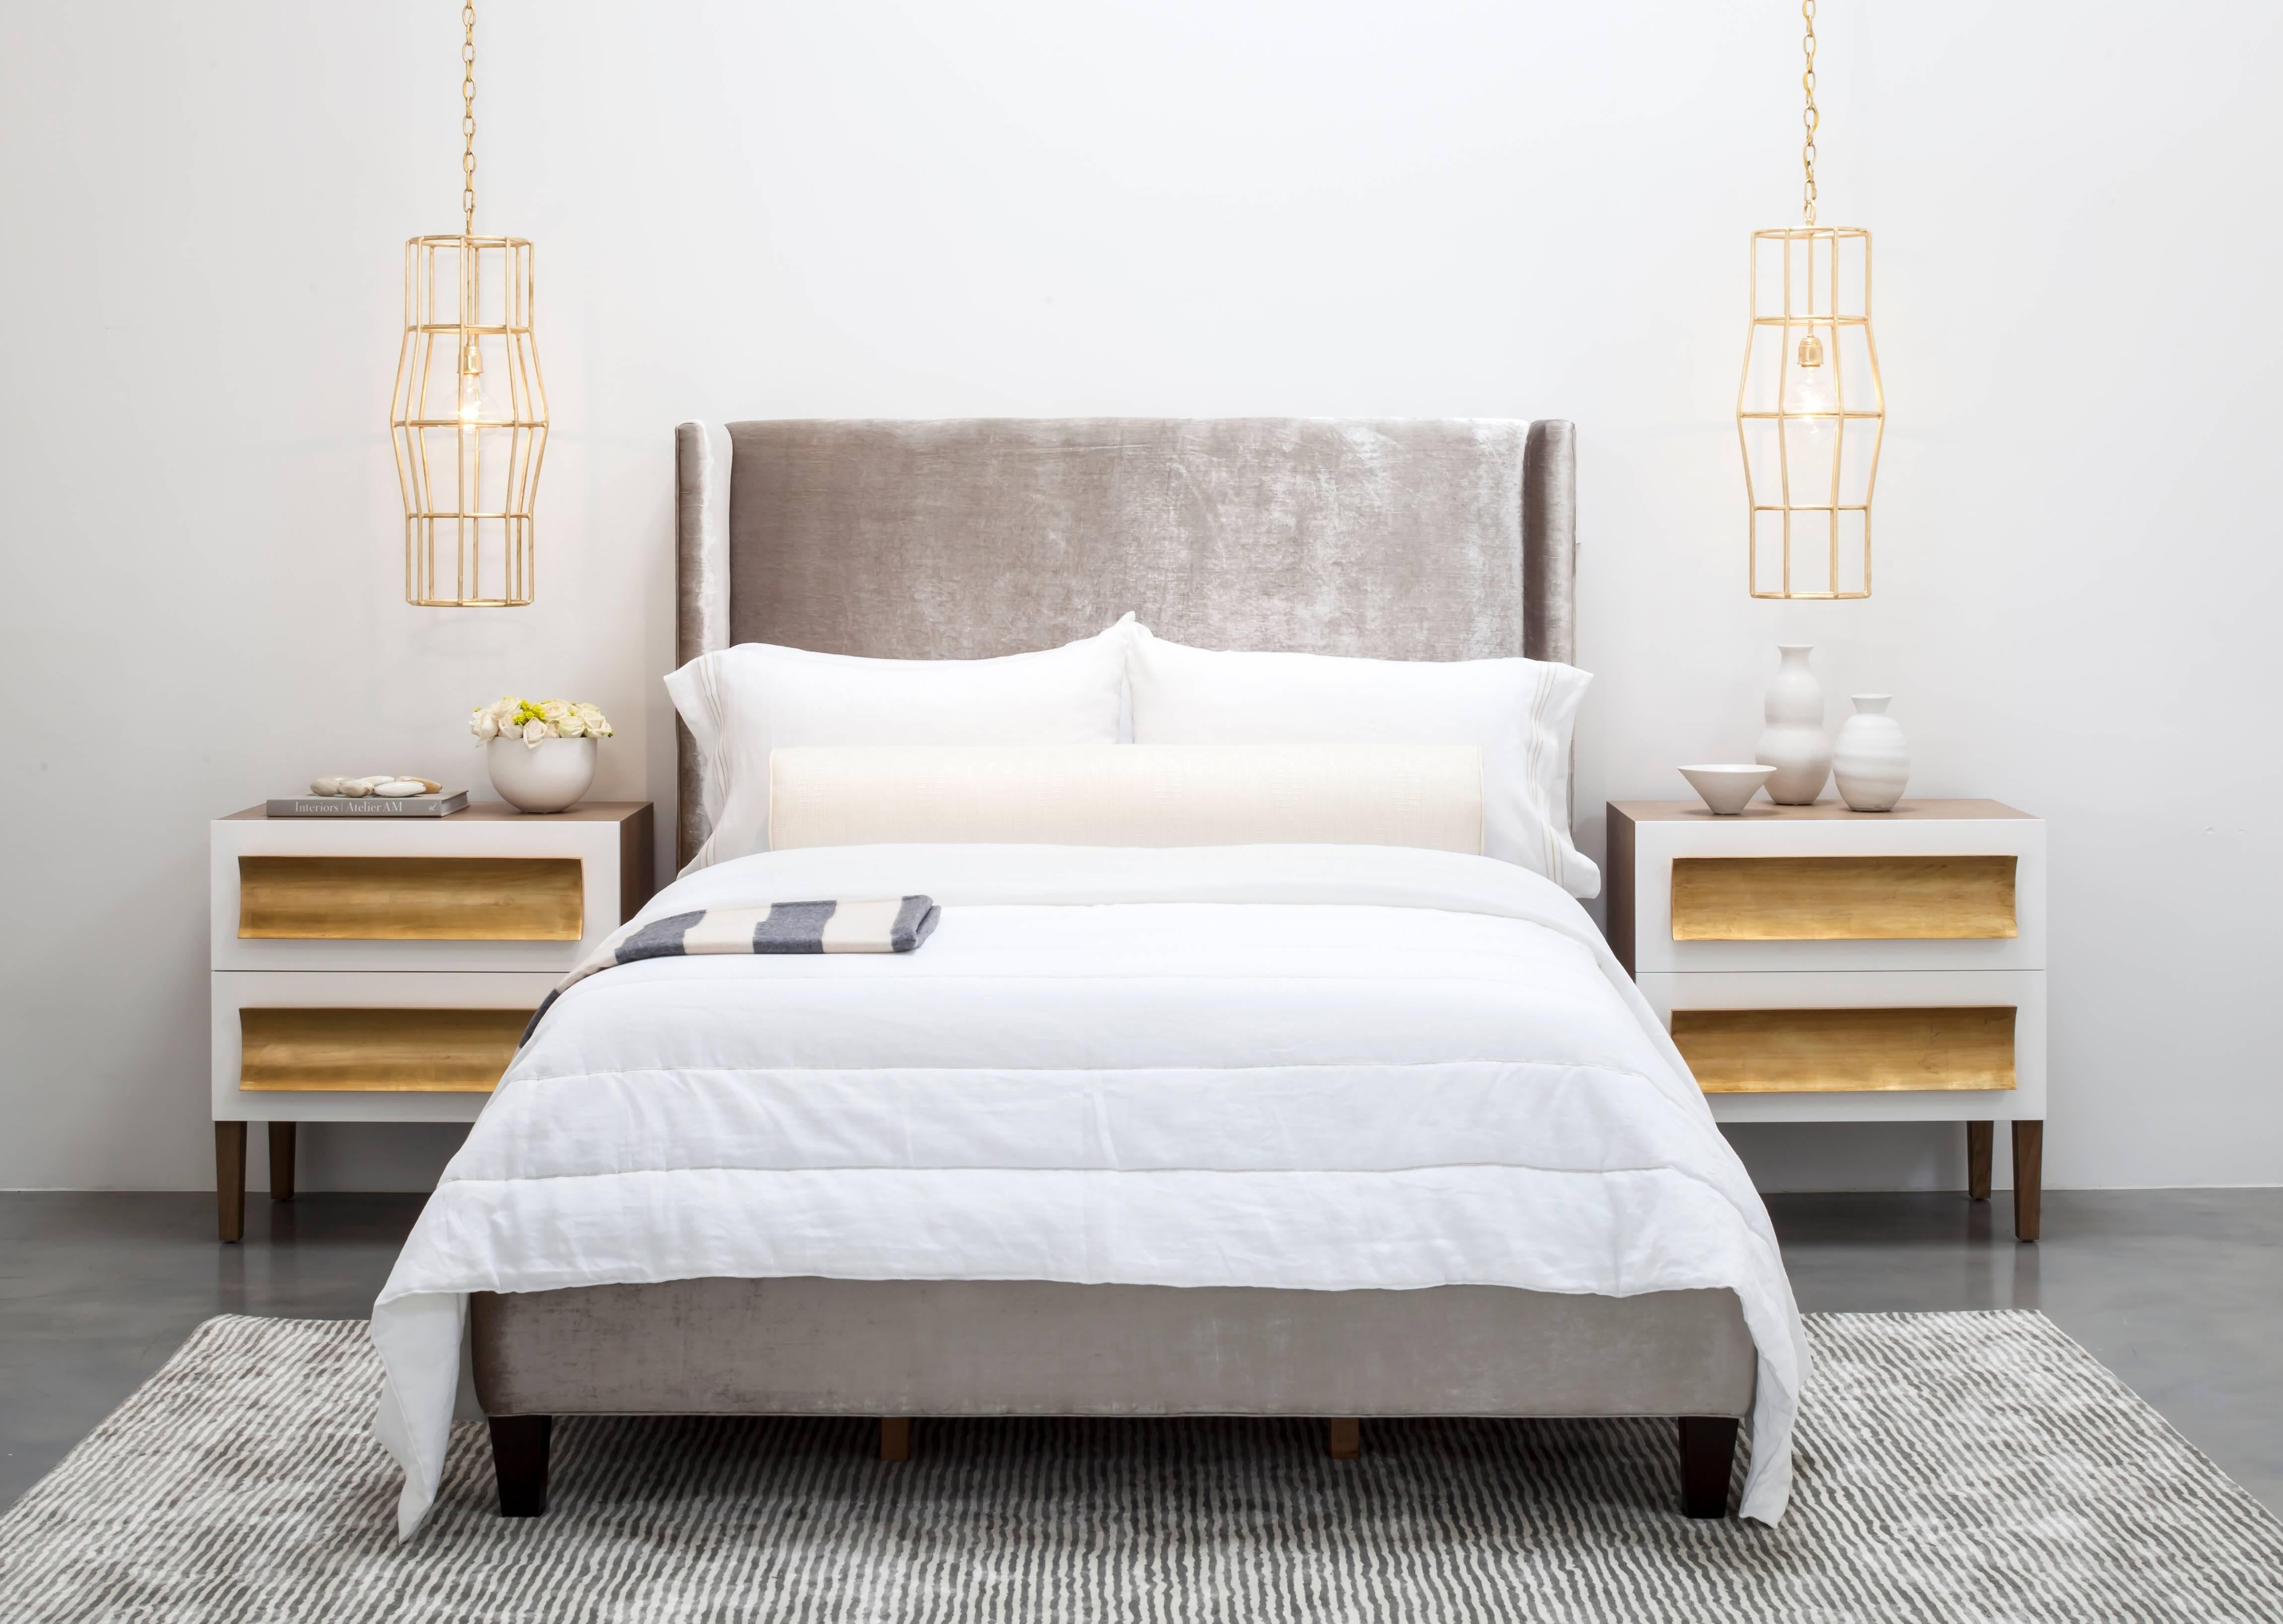 The Masters Bed is a modern bed featuring a fully upholstered headboard and frame featuring a wing back design detail.  Available in King, Cali King, Queen or Twin sizes.  Fully custom and made to order in California. As shown in Queen size in